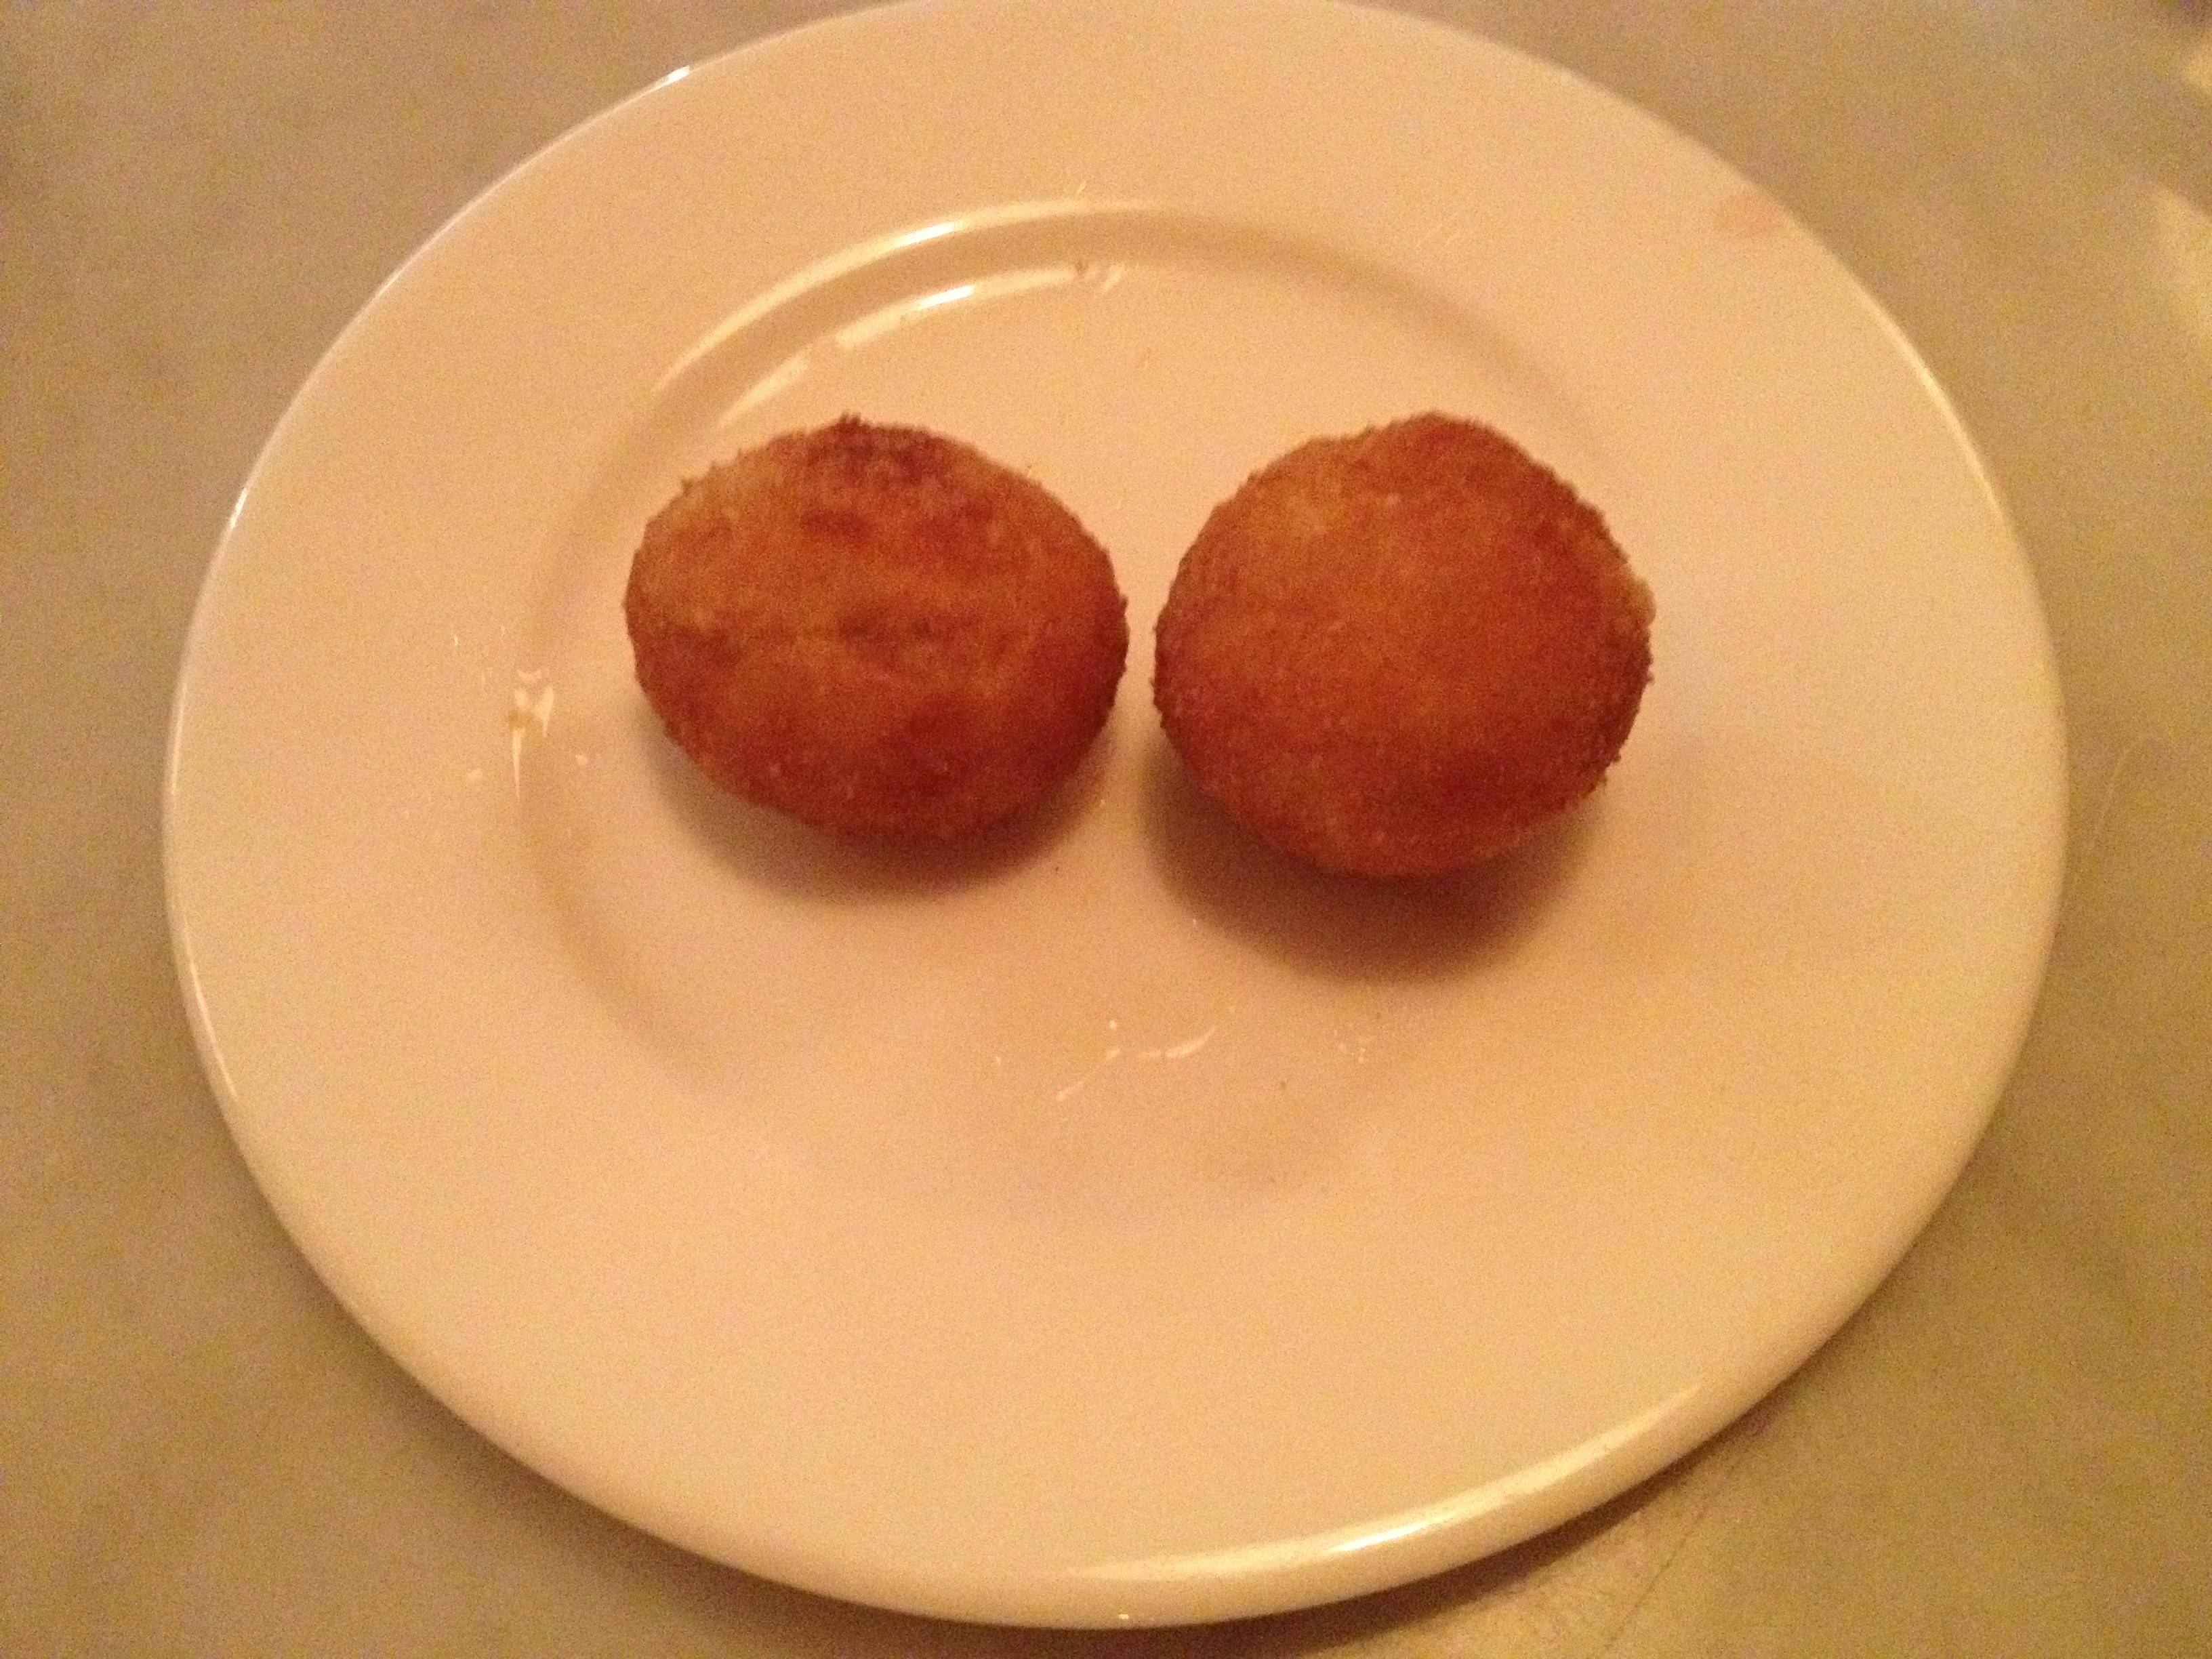 Croquetas - the remaining two (they've gone fast)